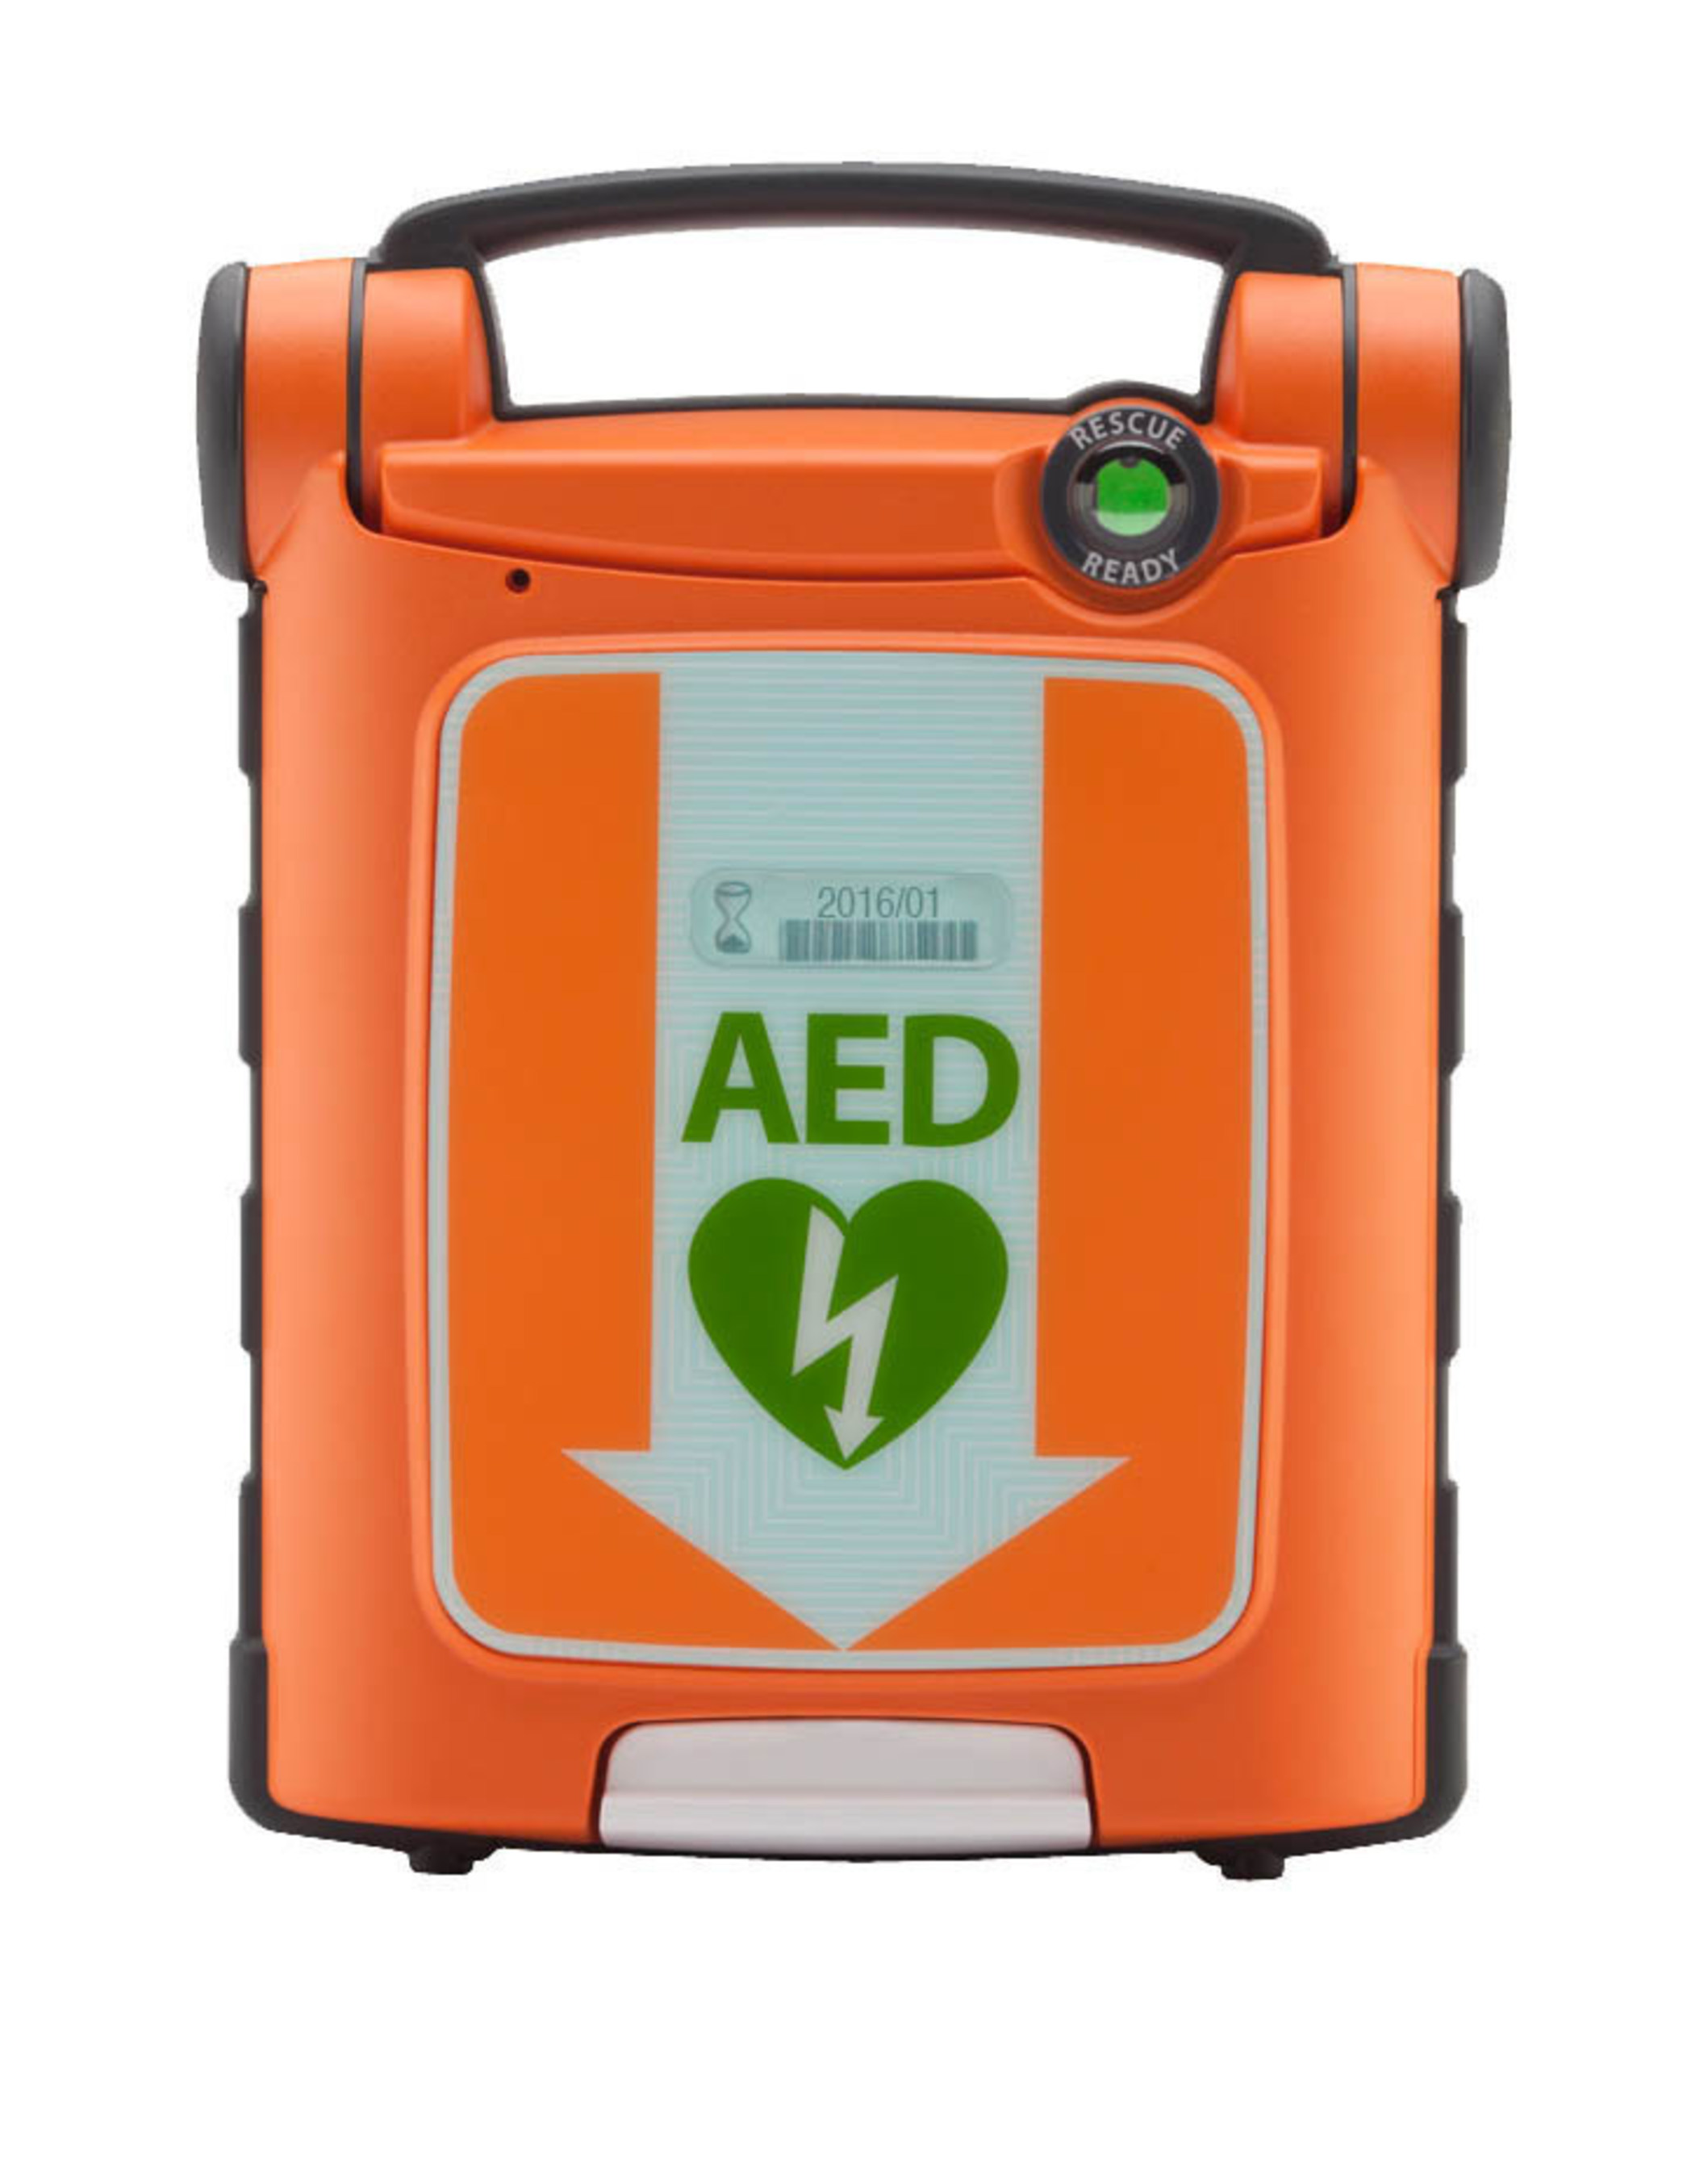 The Powerheart(R) G5 AED is the first FDA-approved AED to combine fully automatic shock delivery, fast shock times, and dual-language functionality to fight the leading cause of death in the United States: sudden cardiac arrest.